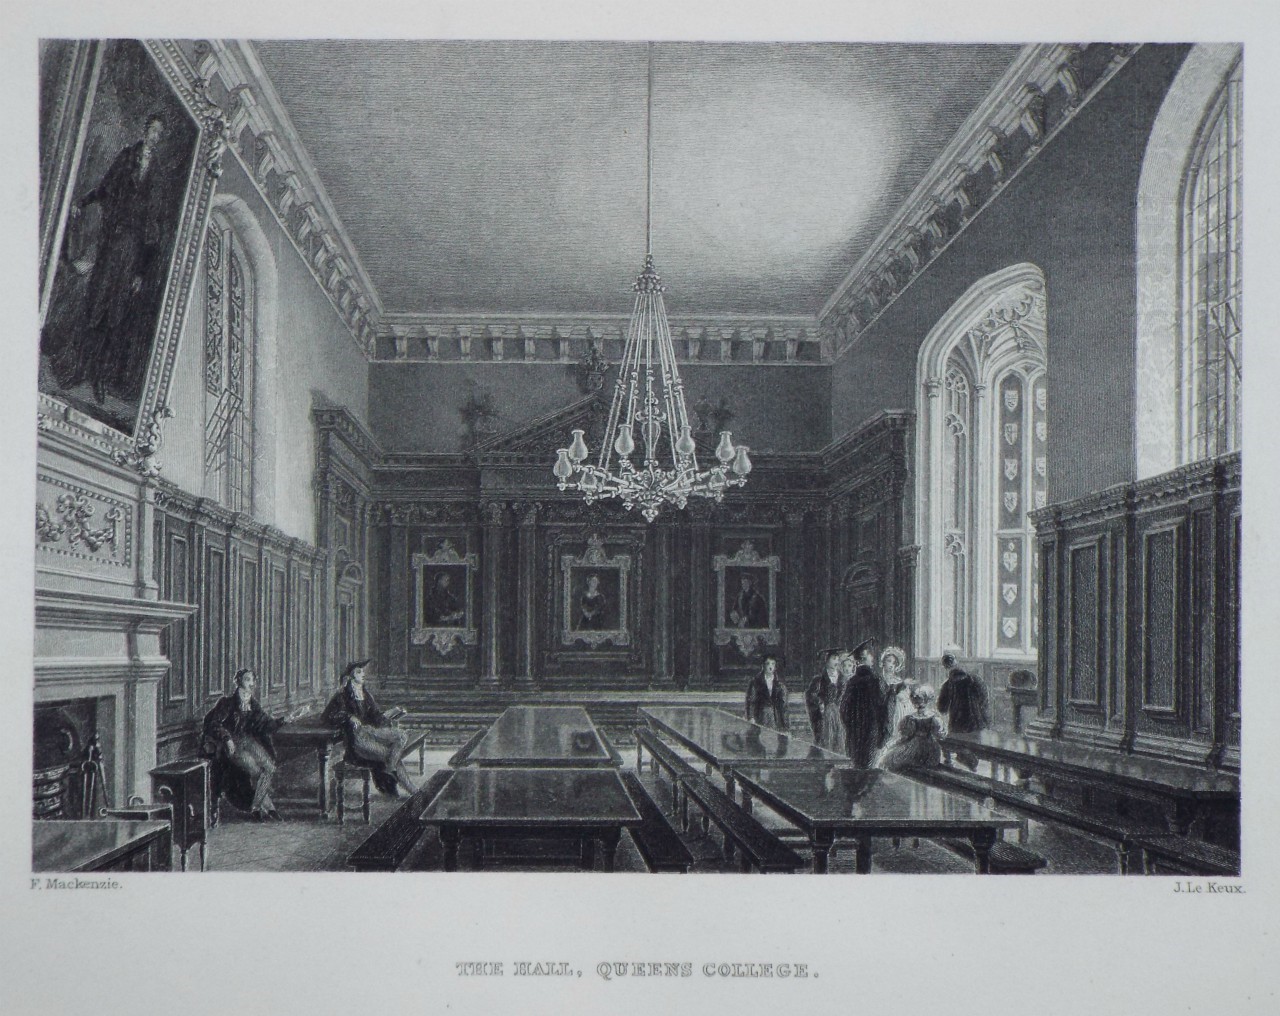 Print - The Hall, Queens College. - Le